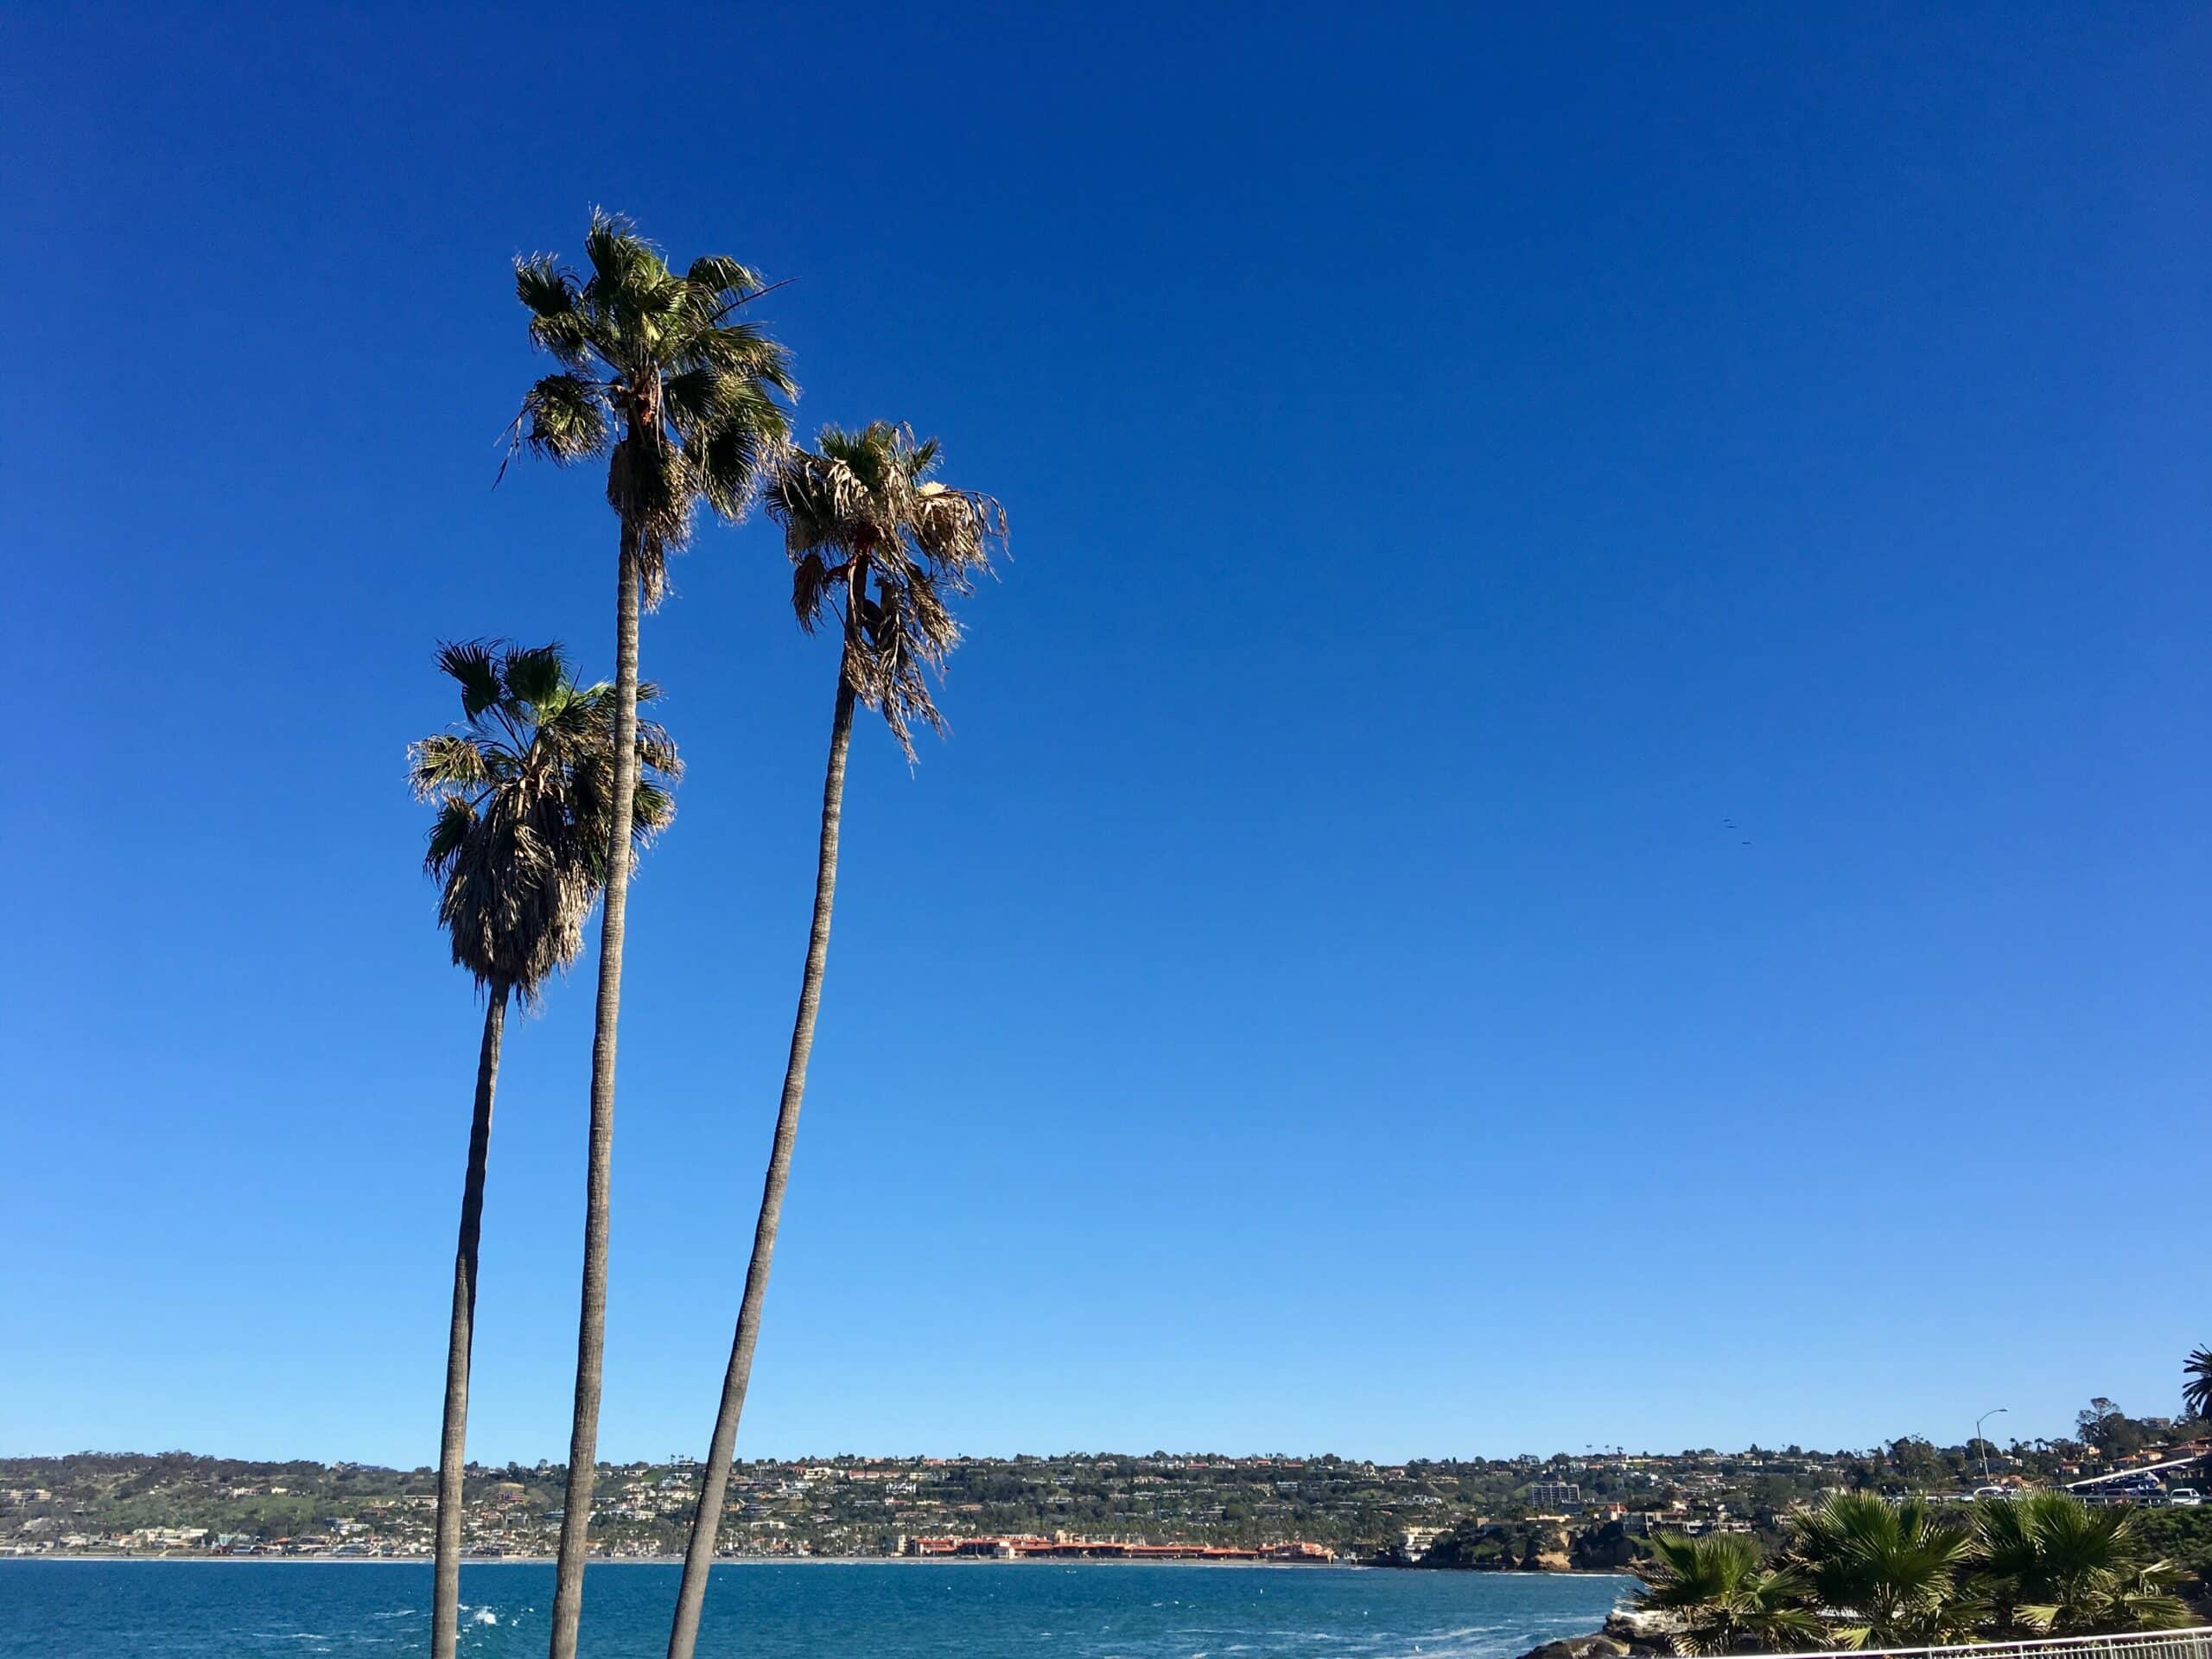 Palm trees in foreground with beach in the background